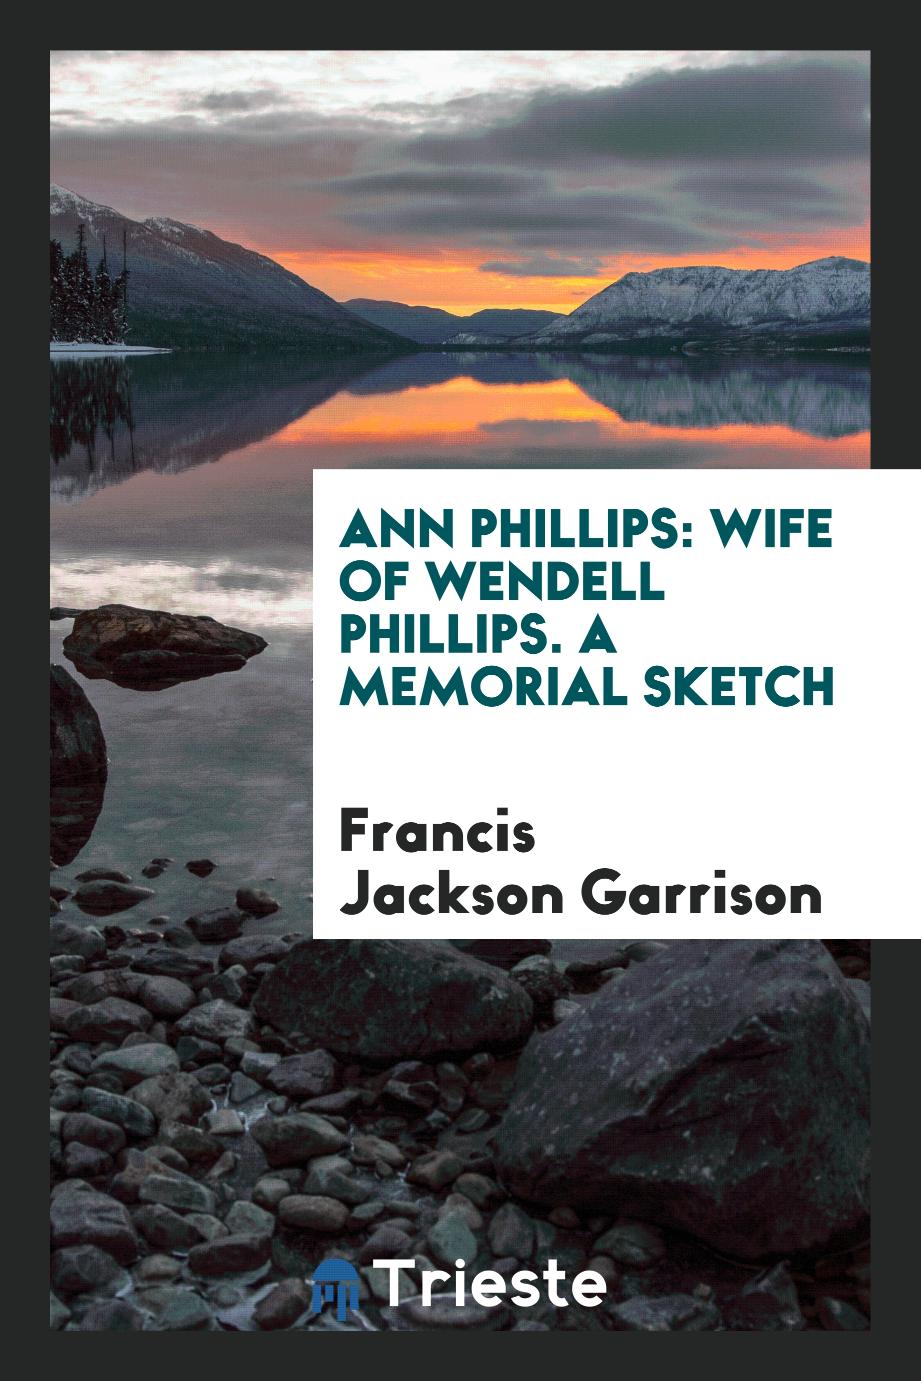 Ann Phillips: Wife of Wendell Phillips. A memorial sketch